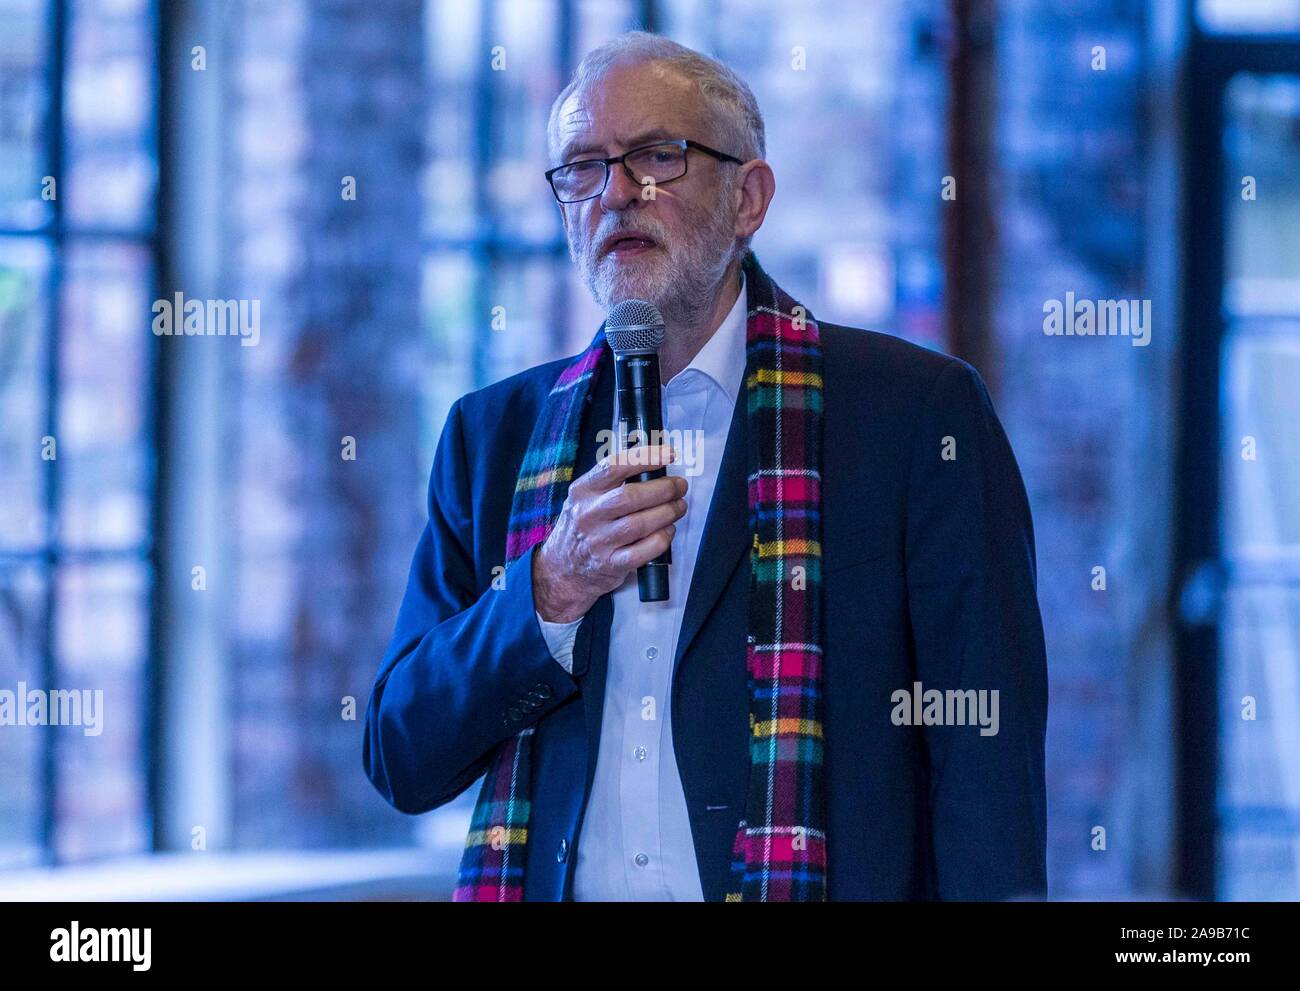 Newtongrange, United Kingdom. 14 November, 2019 Pictured: Jeremy Corbyn at National Mining Museum in Newtongrange. Labour leader, Jeremy Corbyn continues his visit to Scotland as part of his UK Election campaign. Credit: Rich Dyson/Alamy Live News Stock Photo